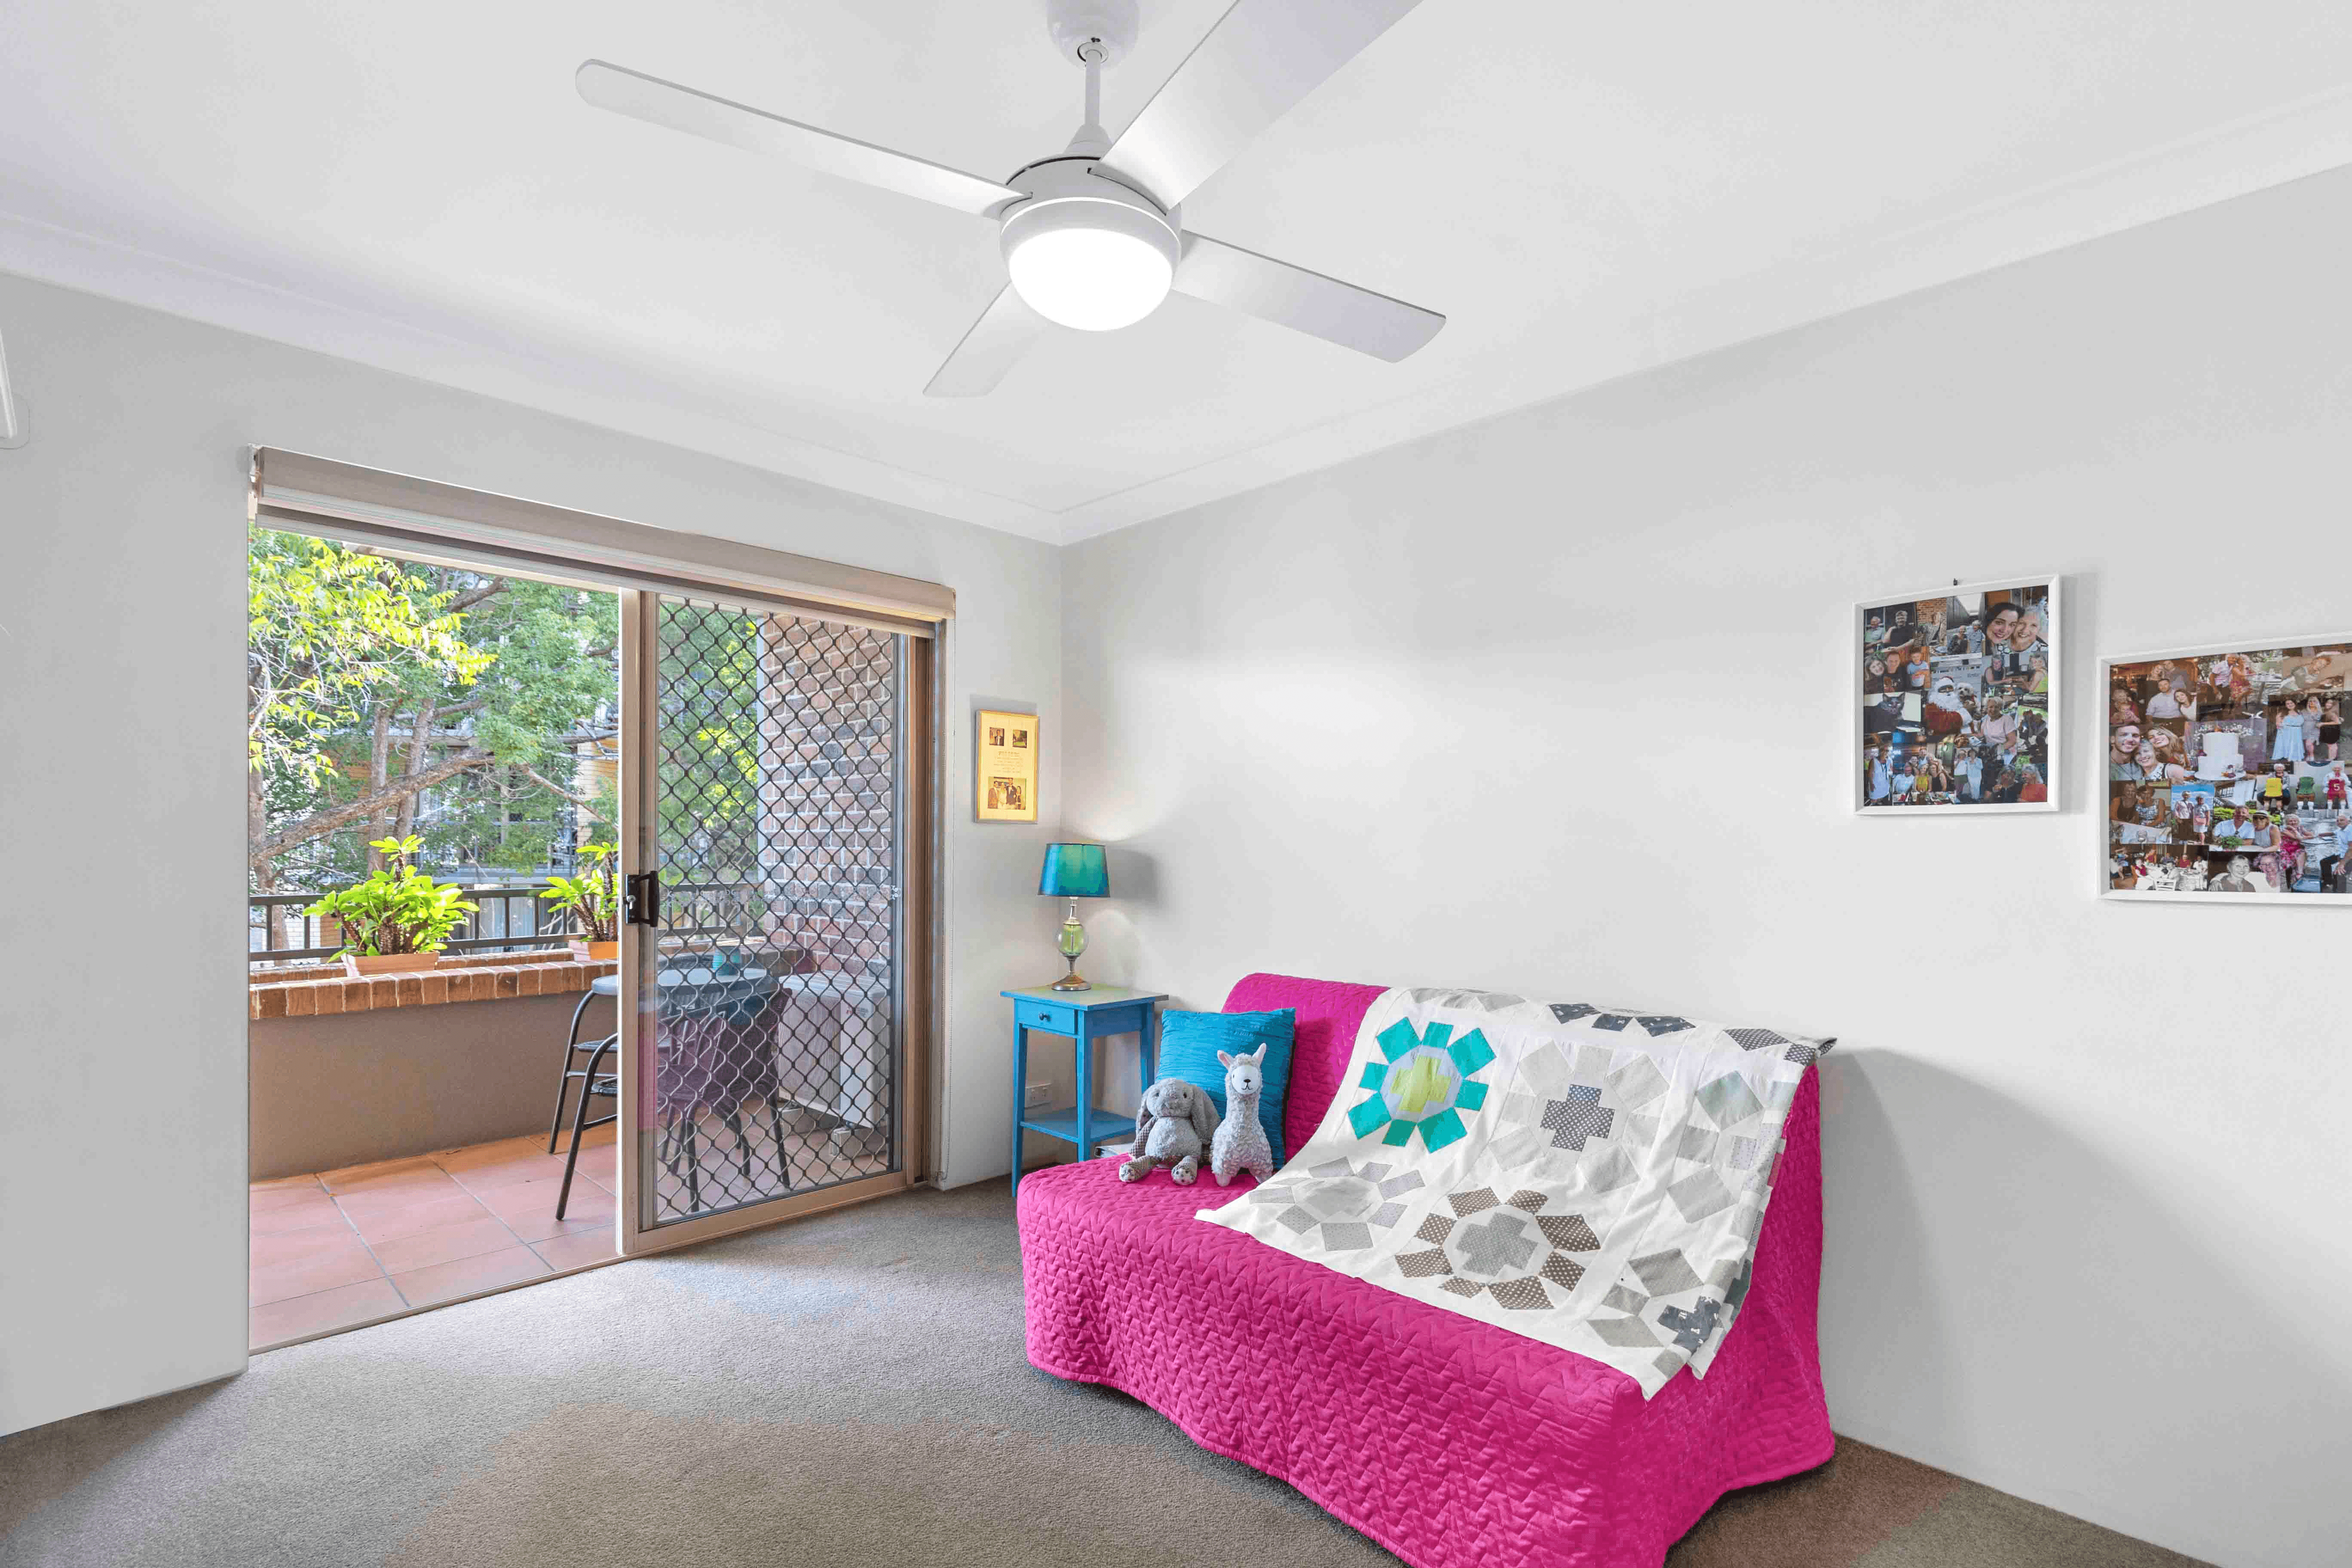 6/35 Maryvale Street, TOOWONG, QLD 4066